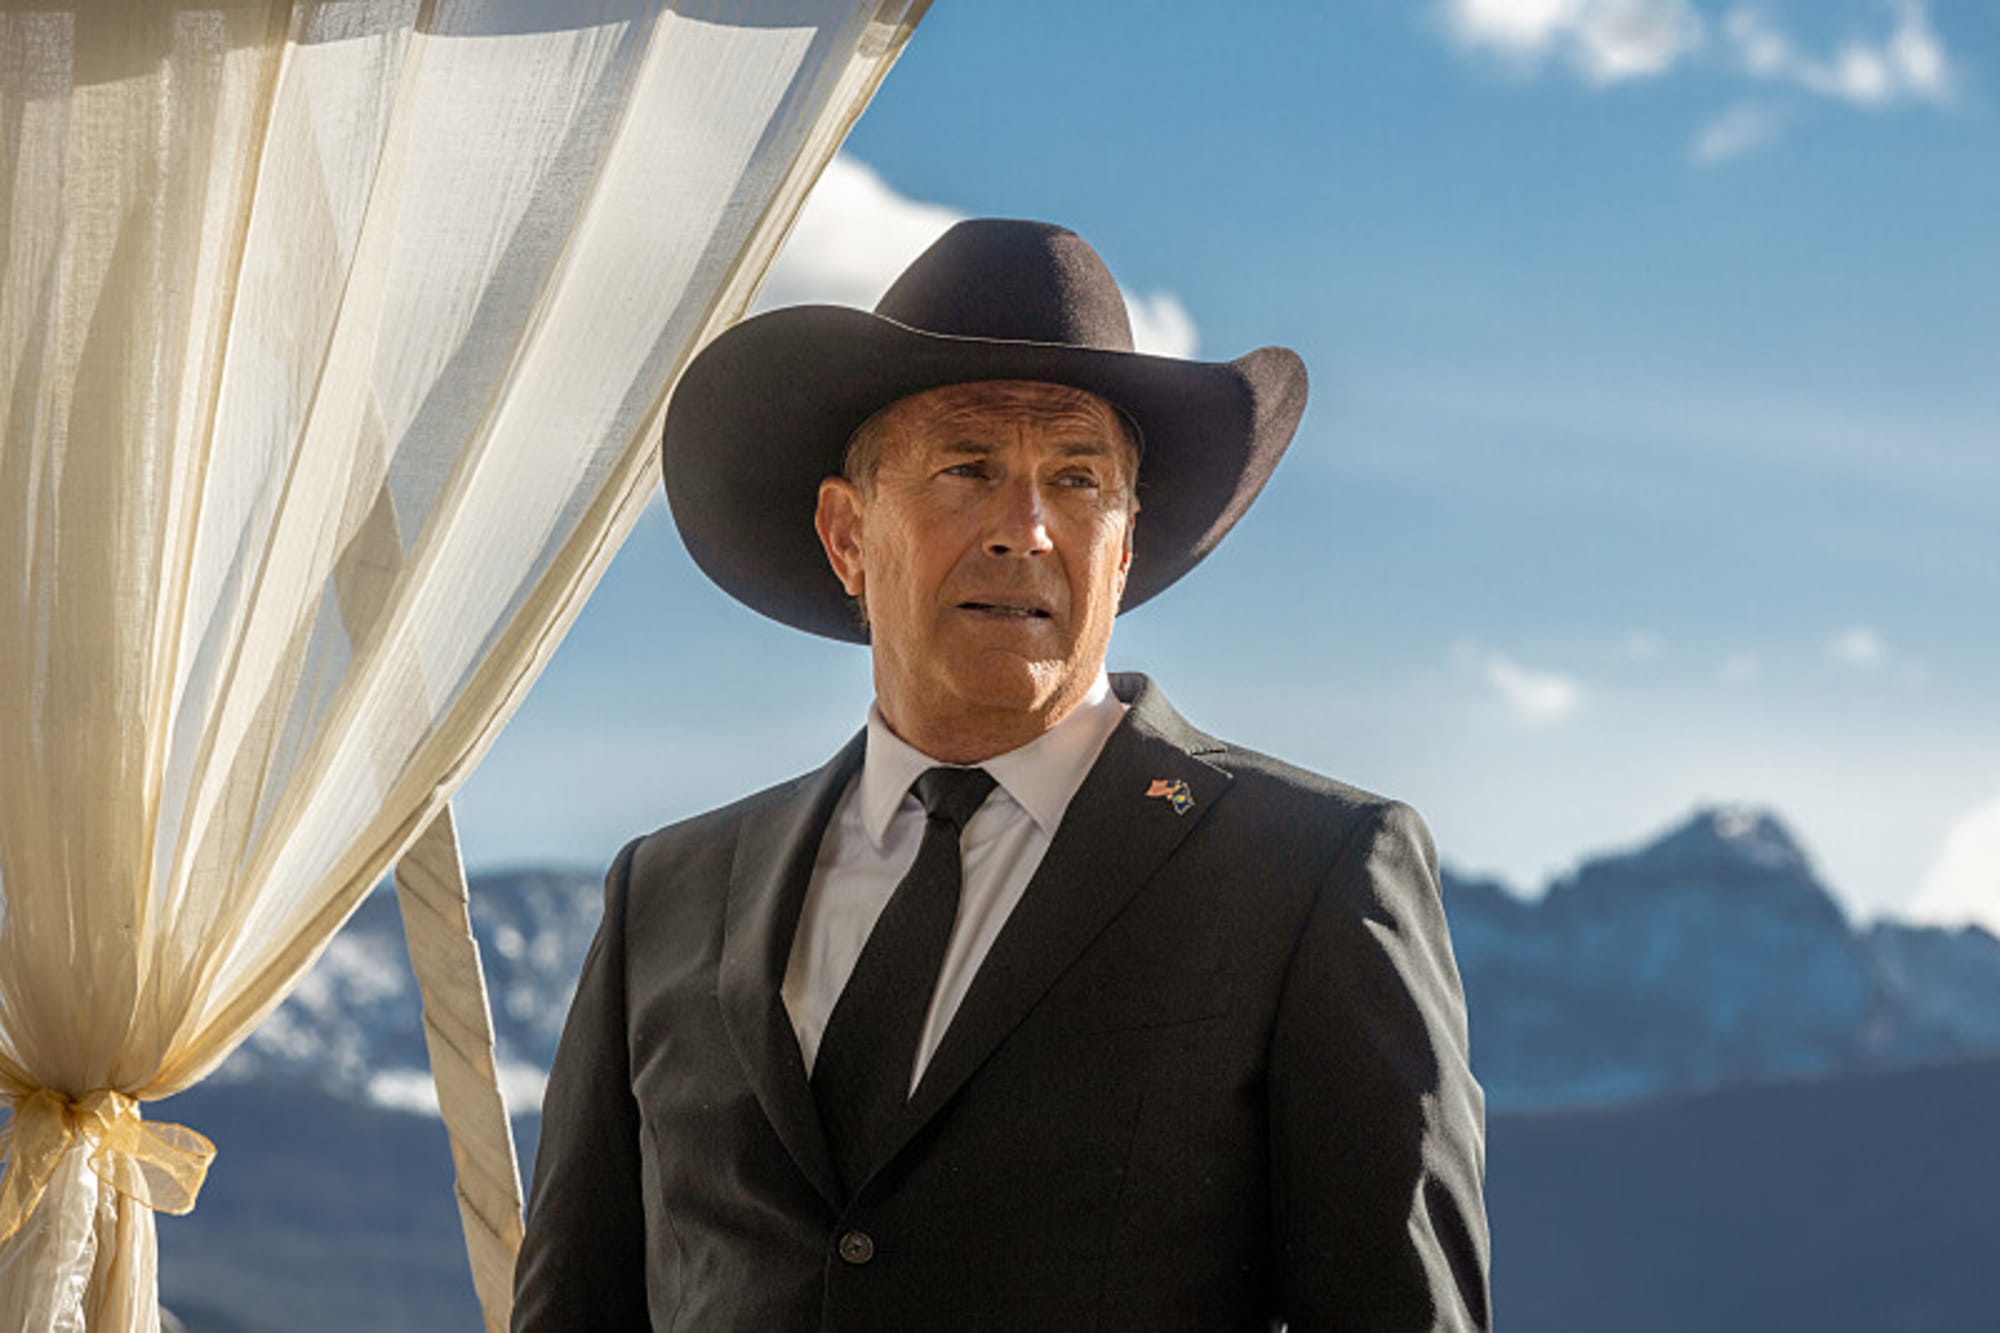 Yellowstone season 5 part 2 release updates, cast, and everything we know so far